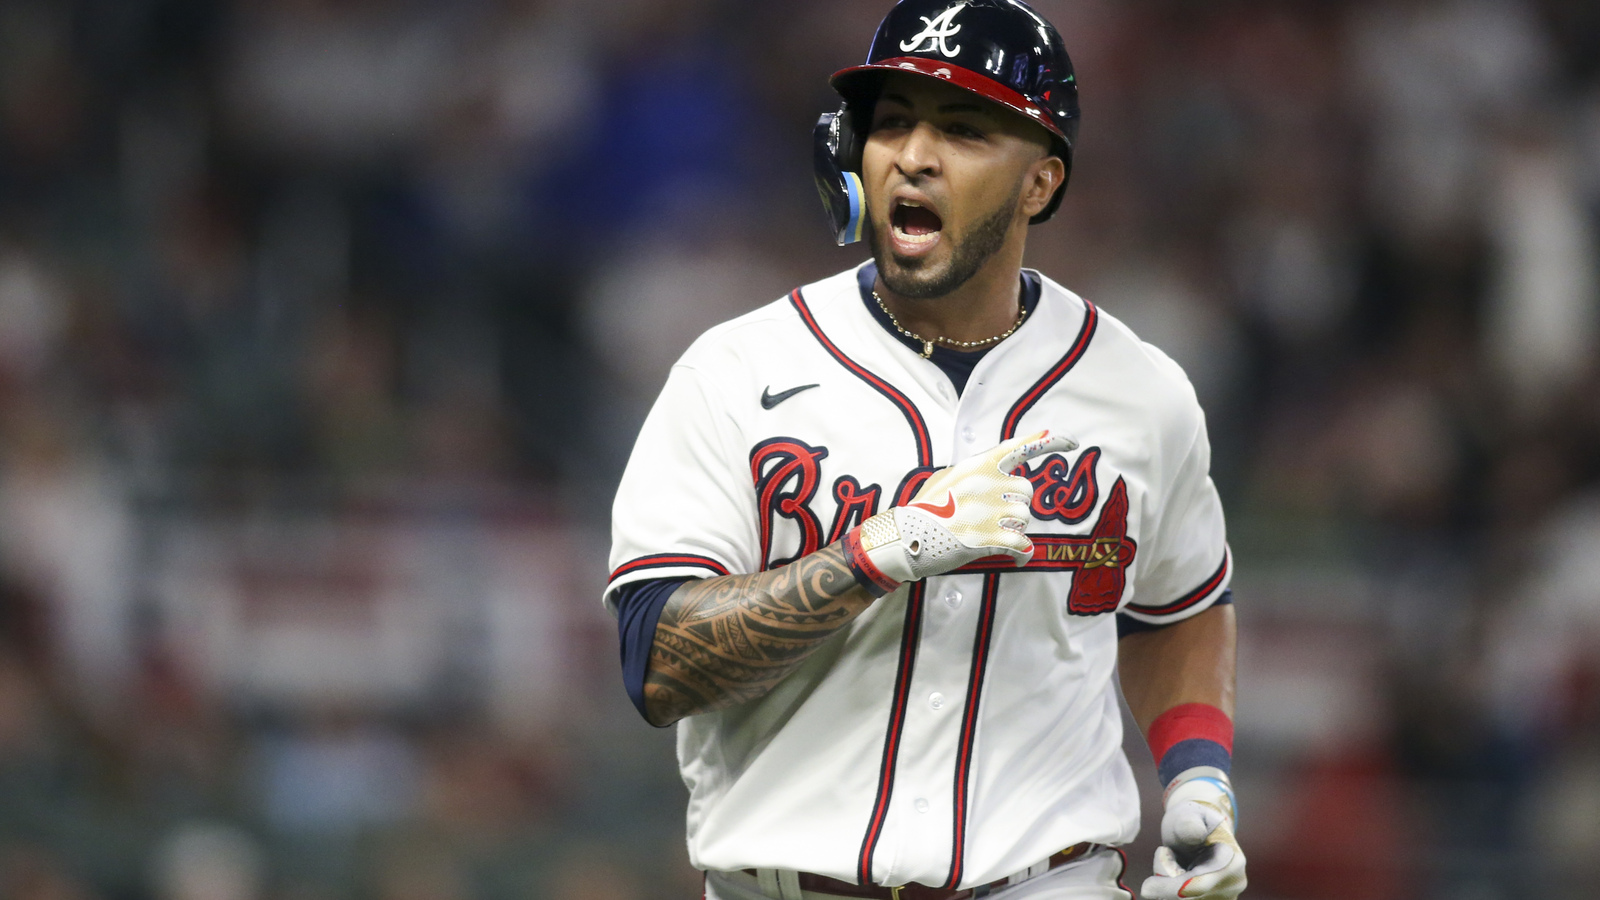 Braves add to their outfield by re-signing Eddie Rosario